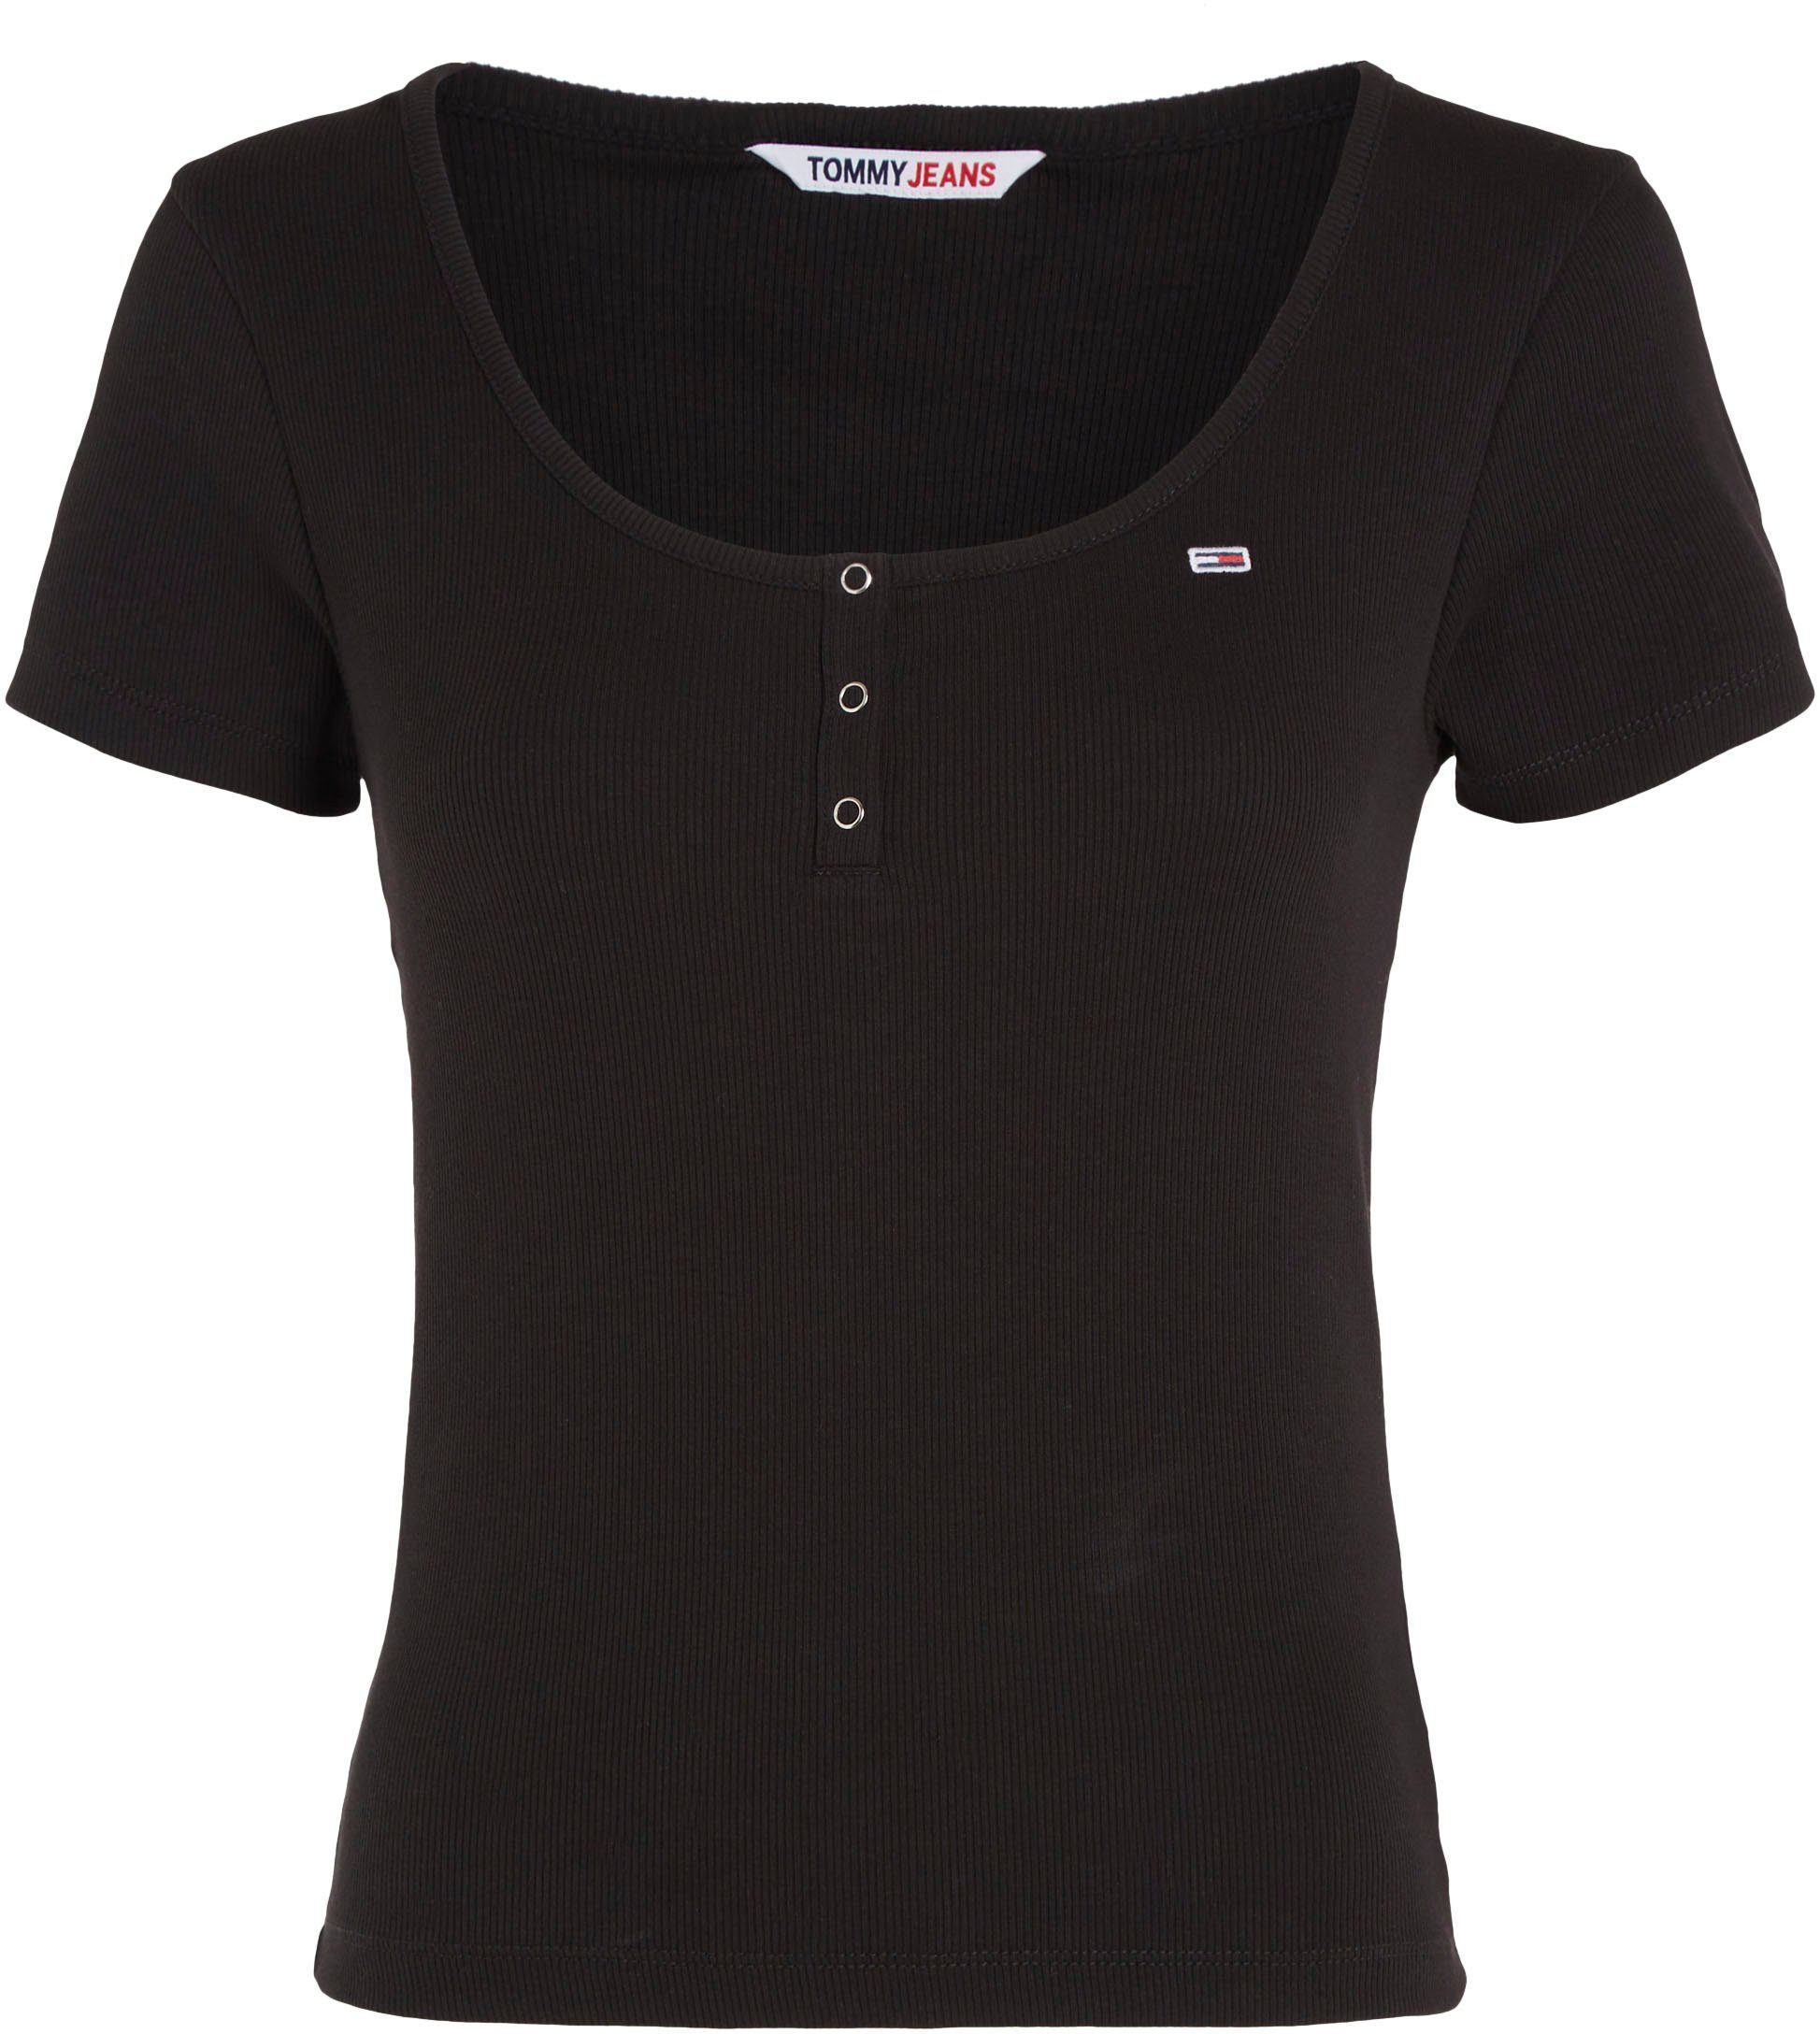 Logostickerei TJW mit BUTTON Black Tommy BBY T-Shirt Tommy Jeans RIB Jeans C-NECK